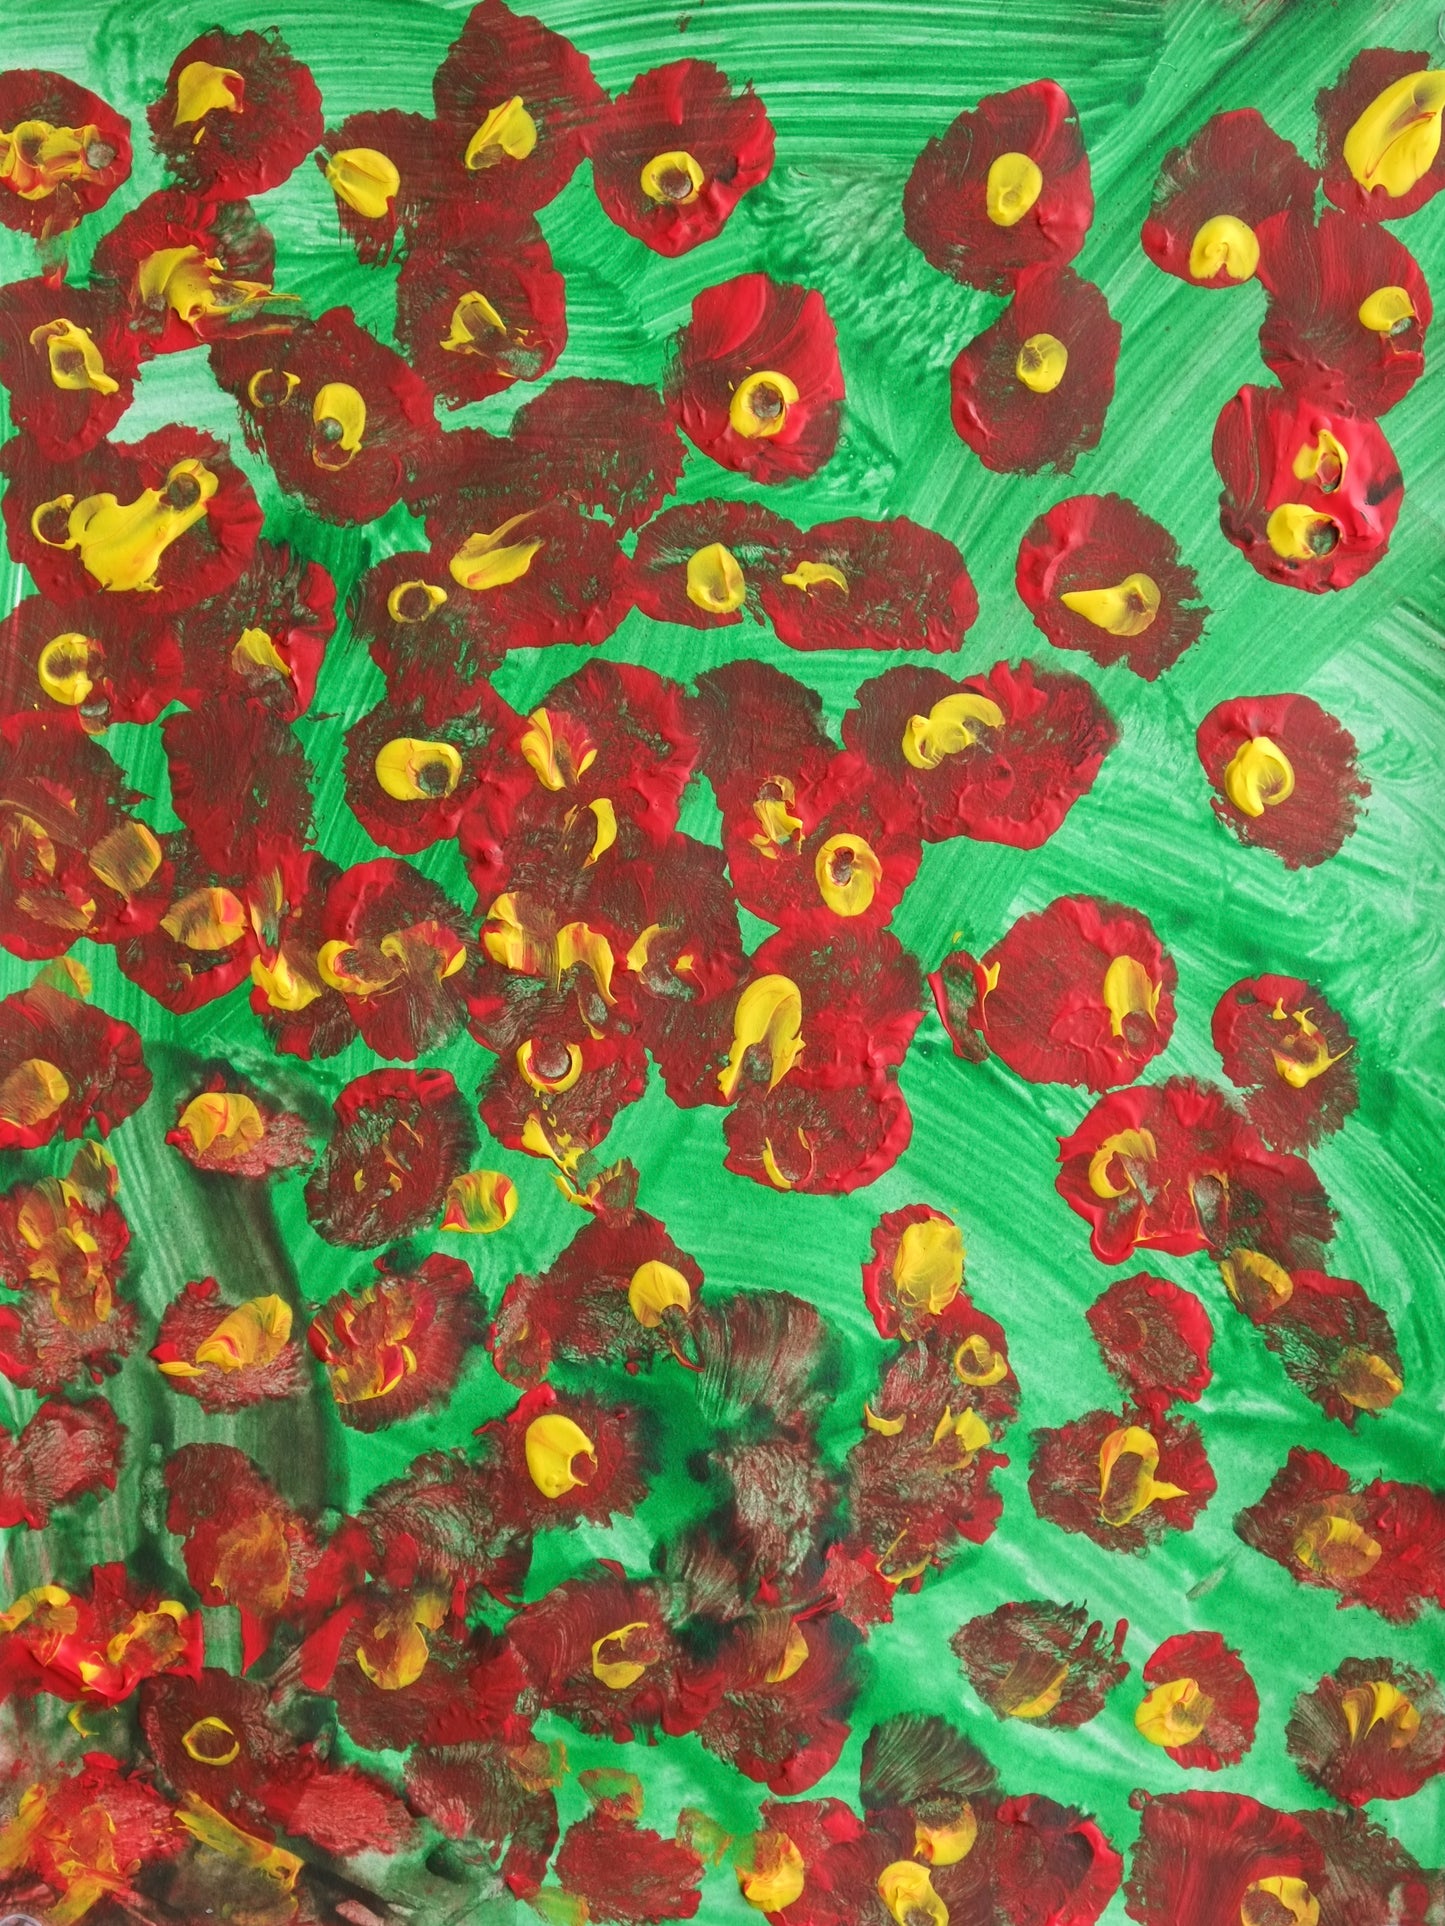 Acrylic on paper artwork with light green background and small red flowers with yellow centers